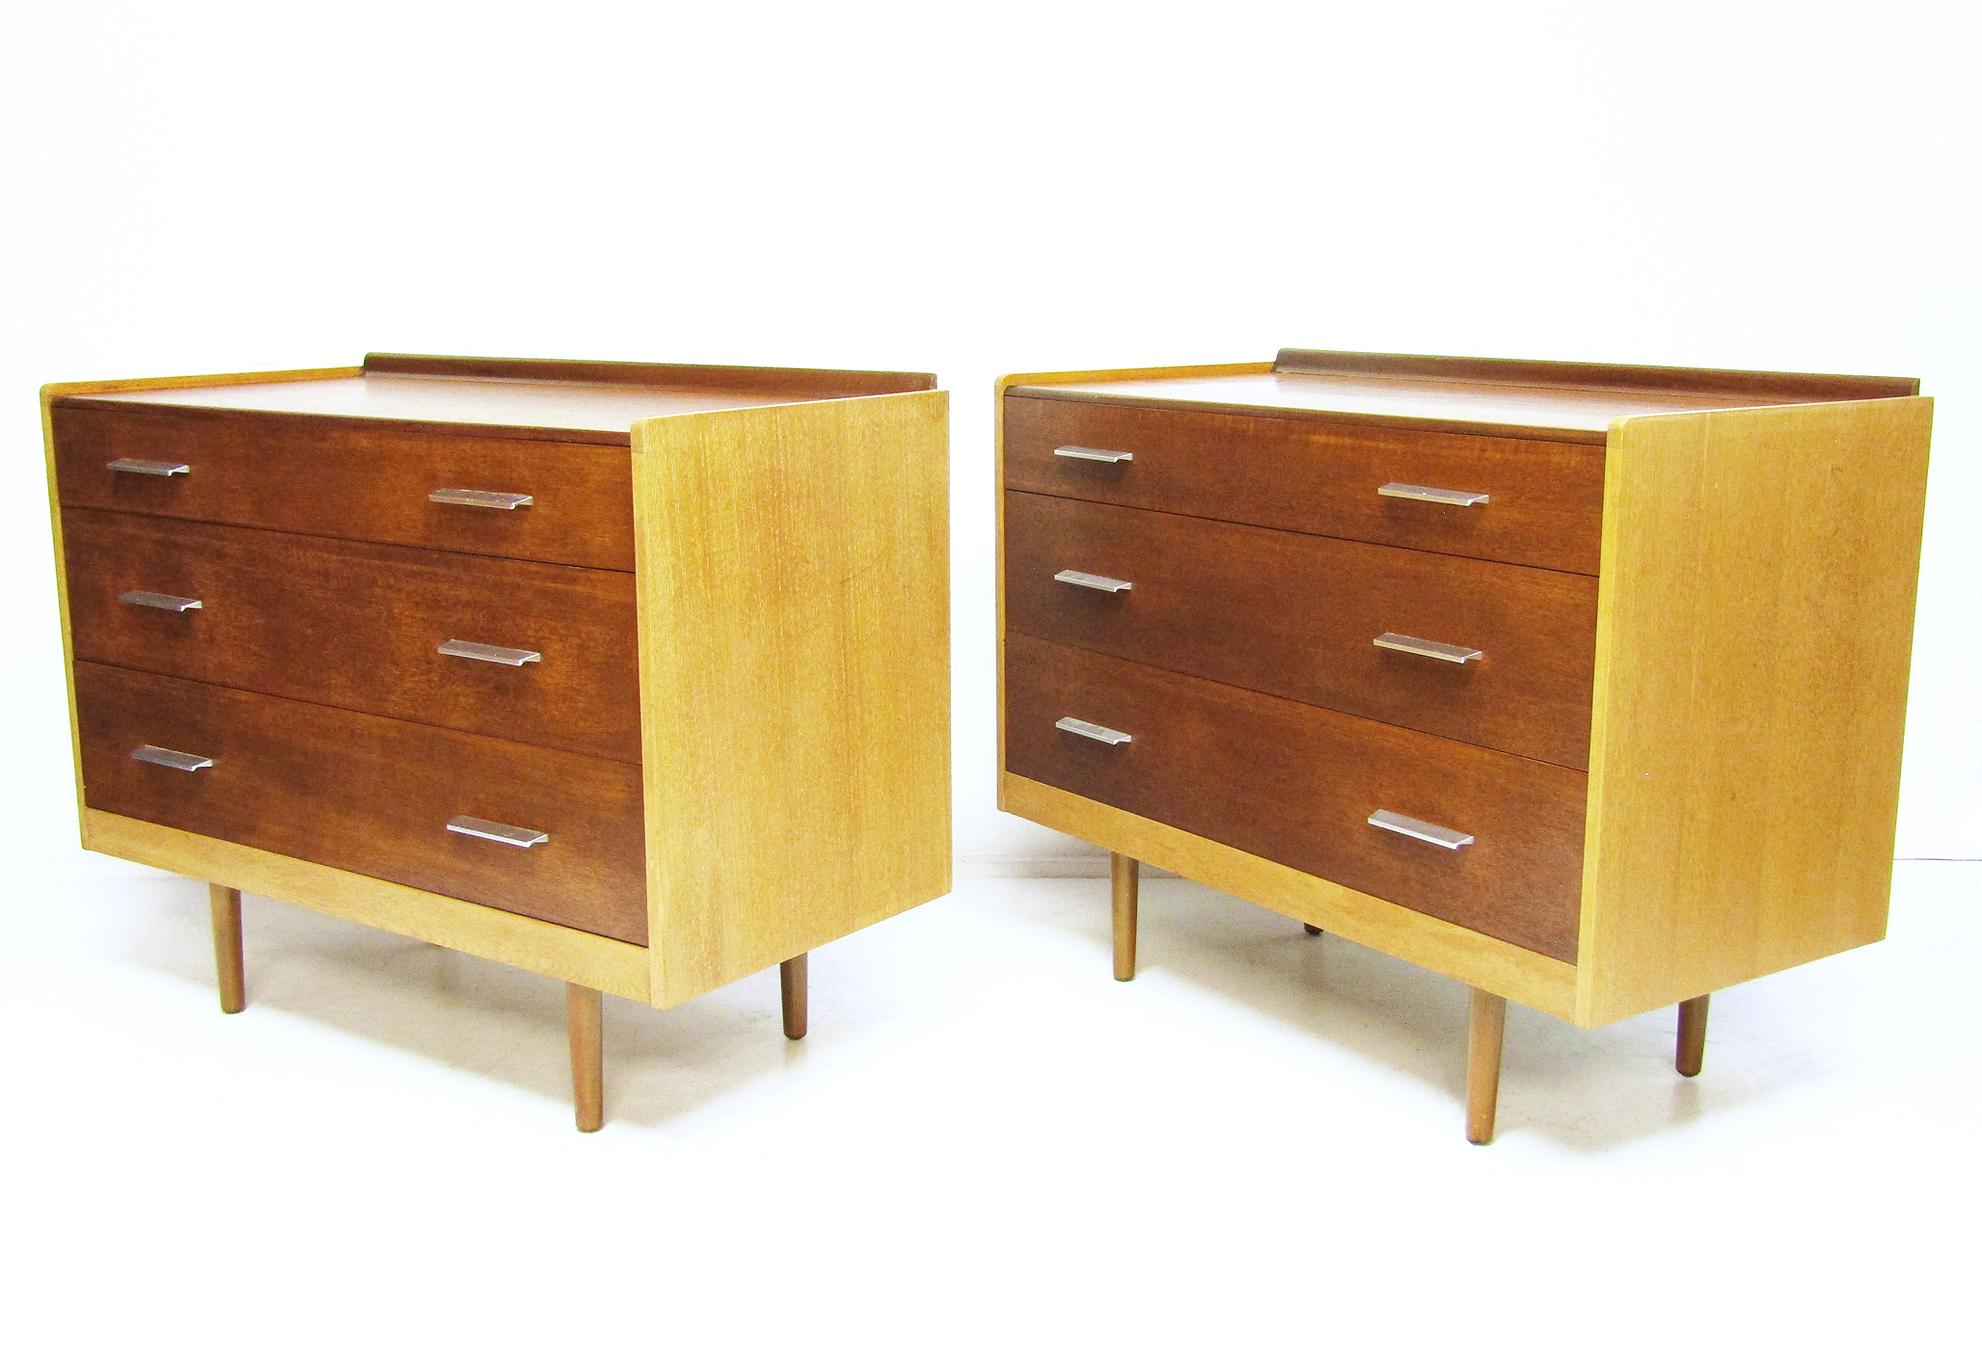 20th Century Pair of 1960s Chests in Teak & Oak by John & Sylvia Reid for Stag